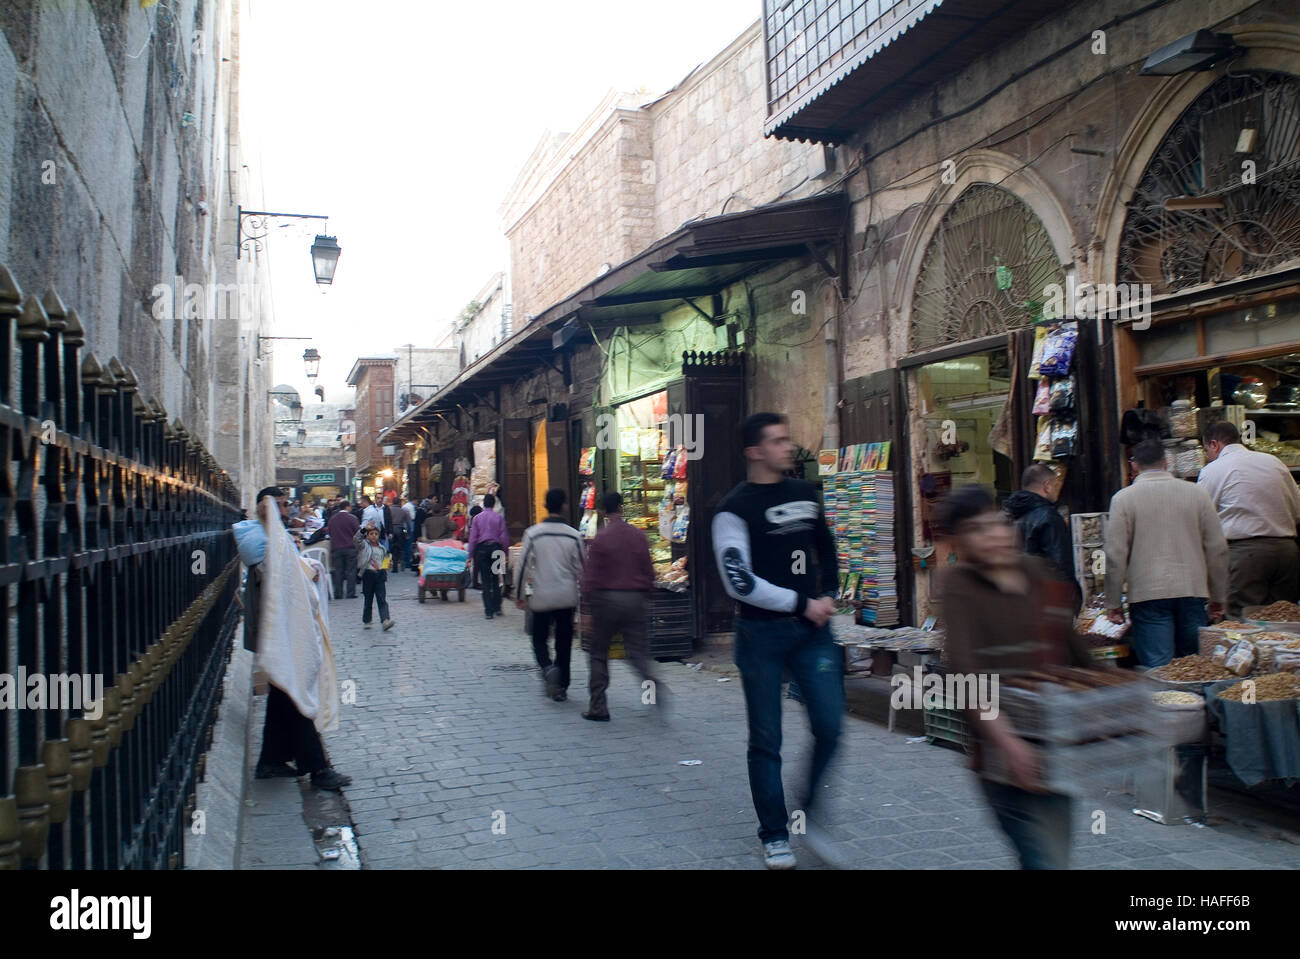 A street scene in the old town of Aleppo, Syria, before the civil war. Stock Photo